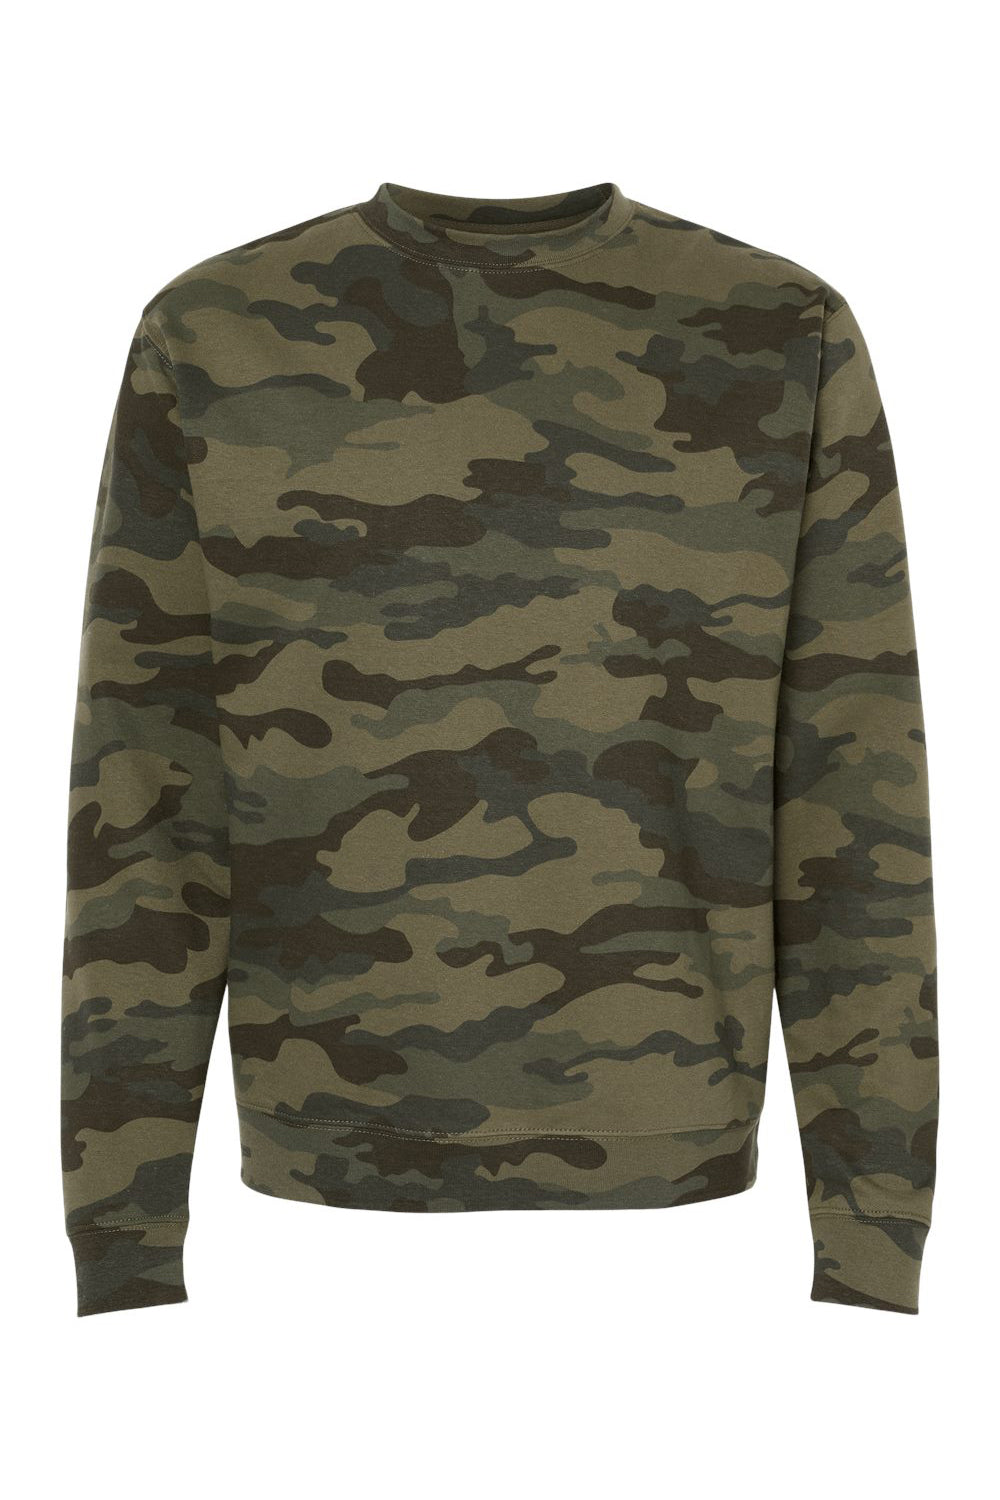 Independent Trading Co. SS3000 Mens Crewneck Sweatshirt Forest Green Camo Flat Front